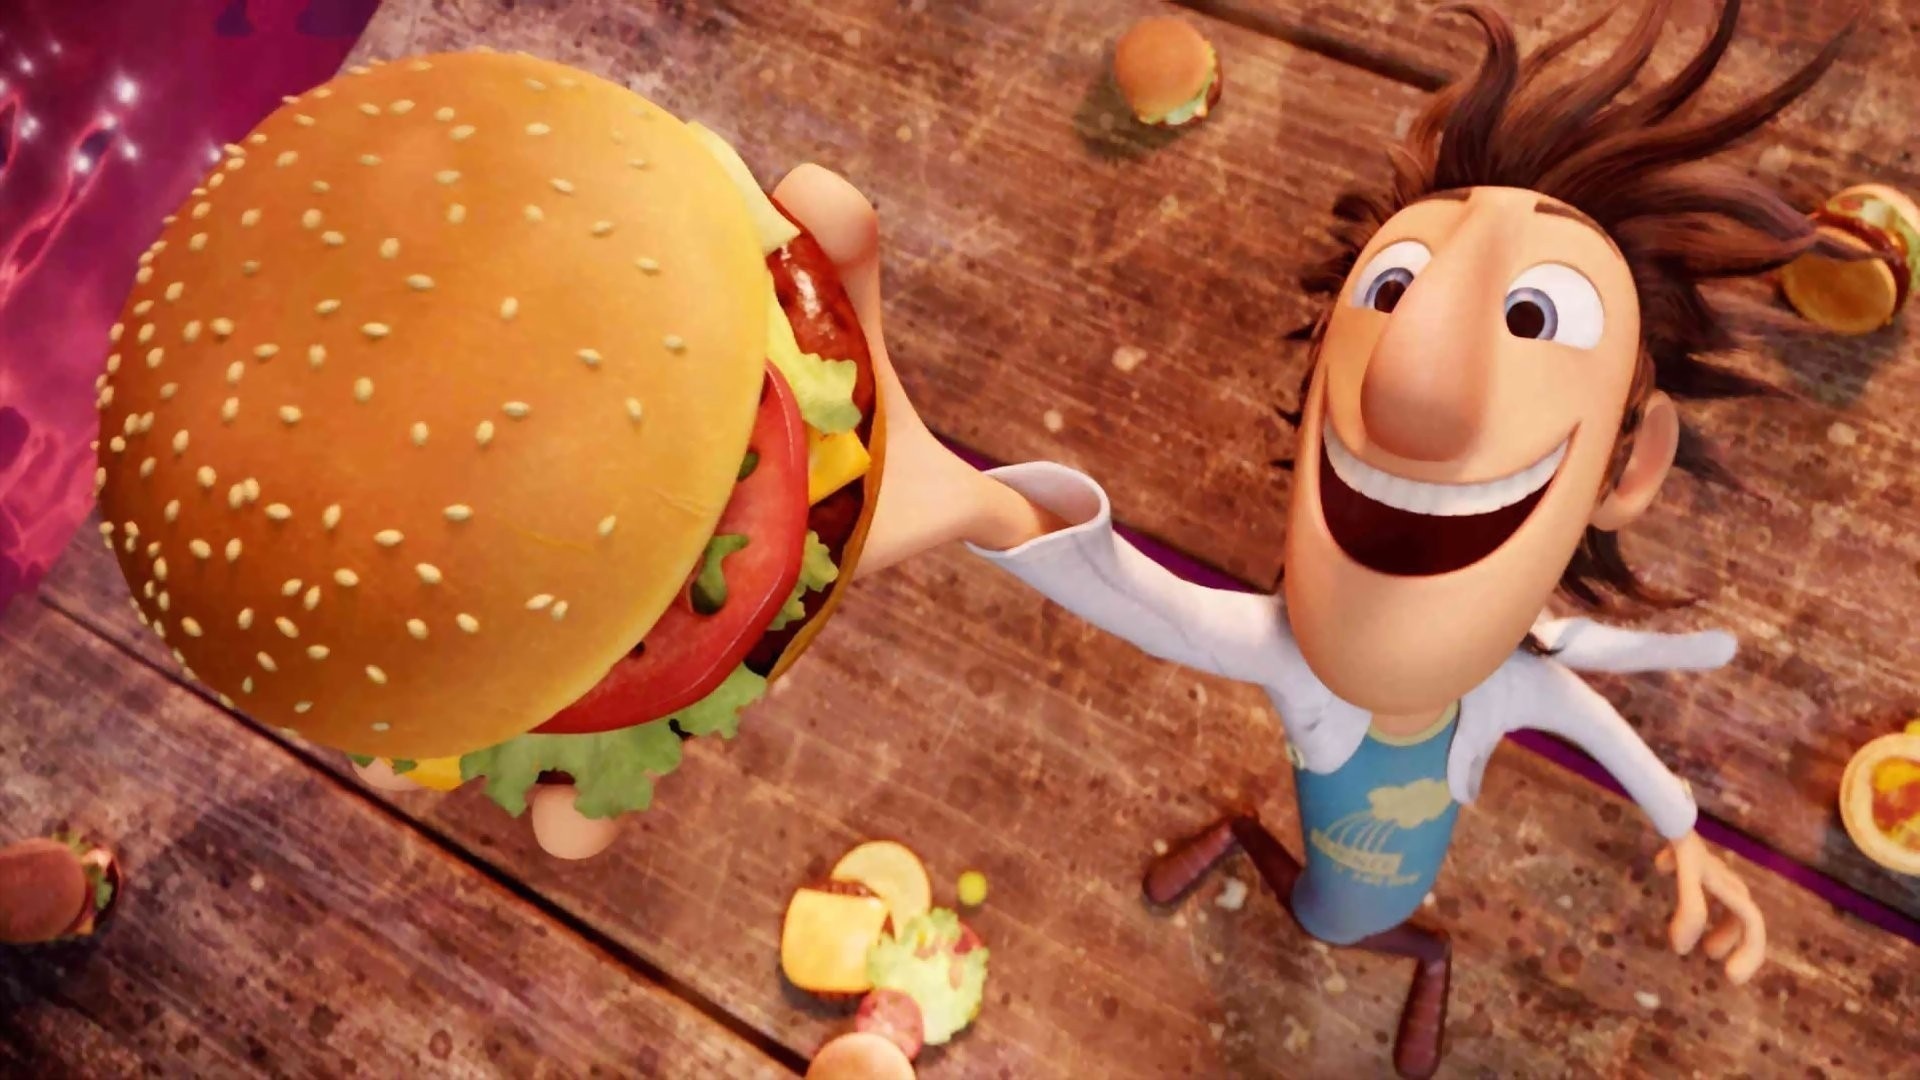 download wallpaper: Cloudy with a Chance of Meatballs – Hamburger wallpaper